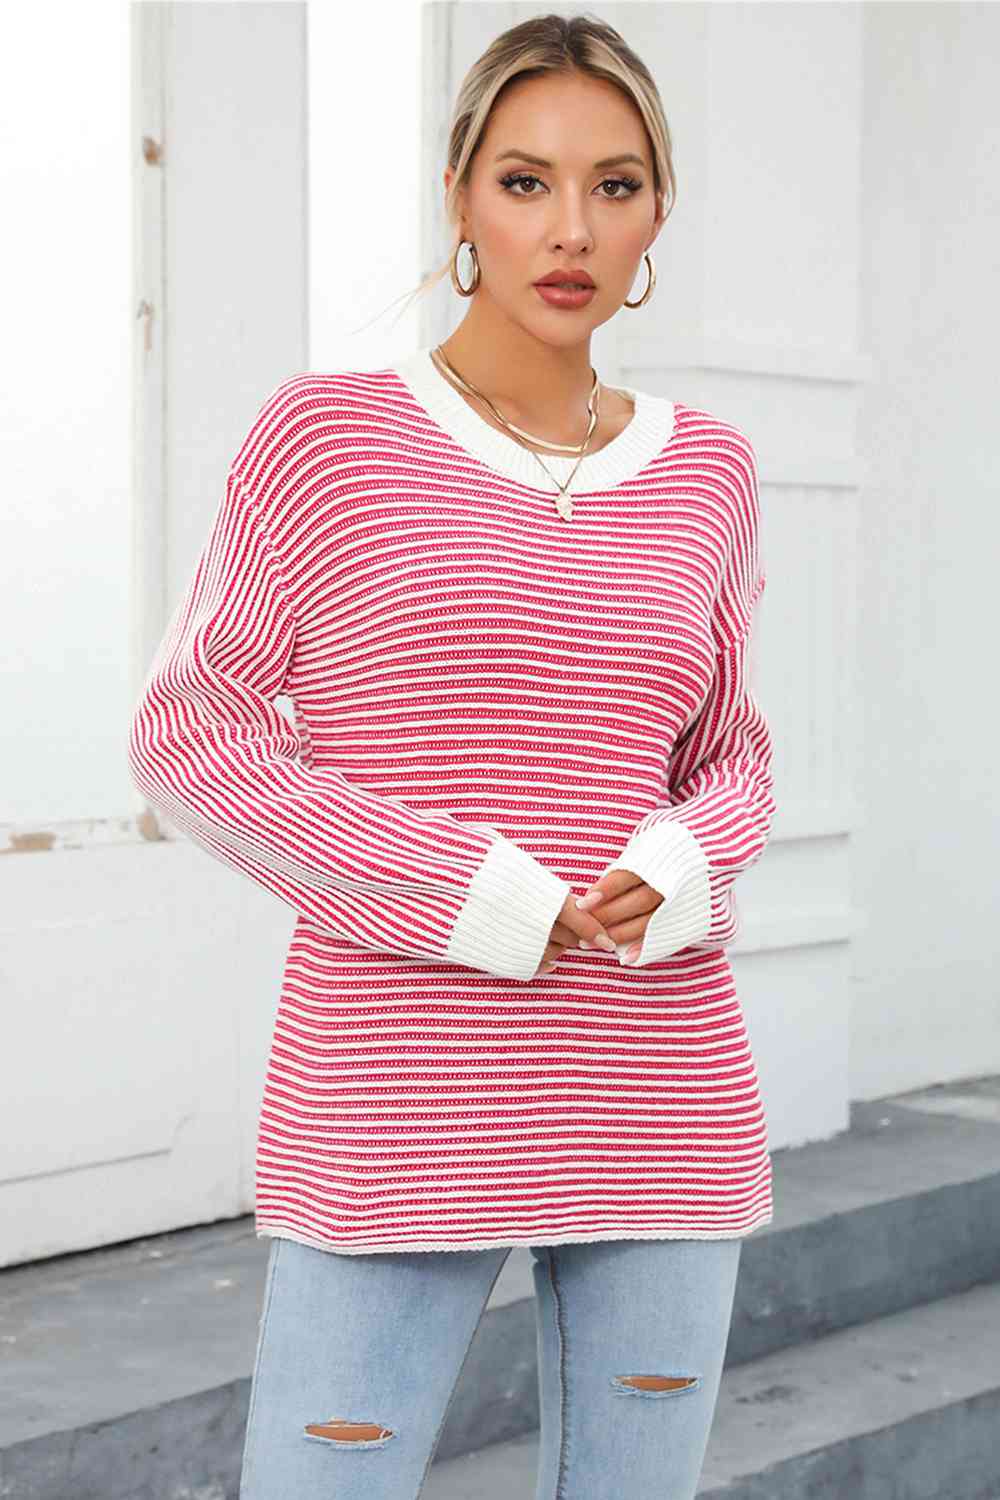 Striped Round Neck Long Sleeve Knit Top - Guy Christopher 